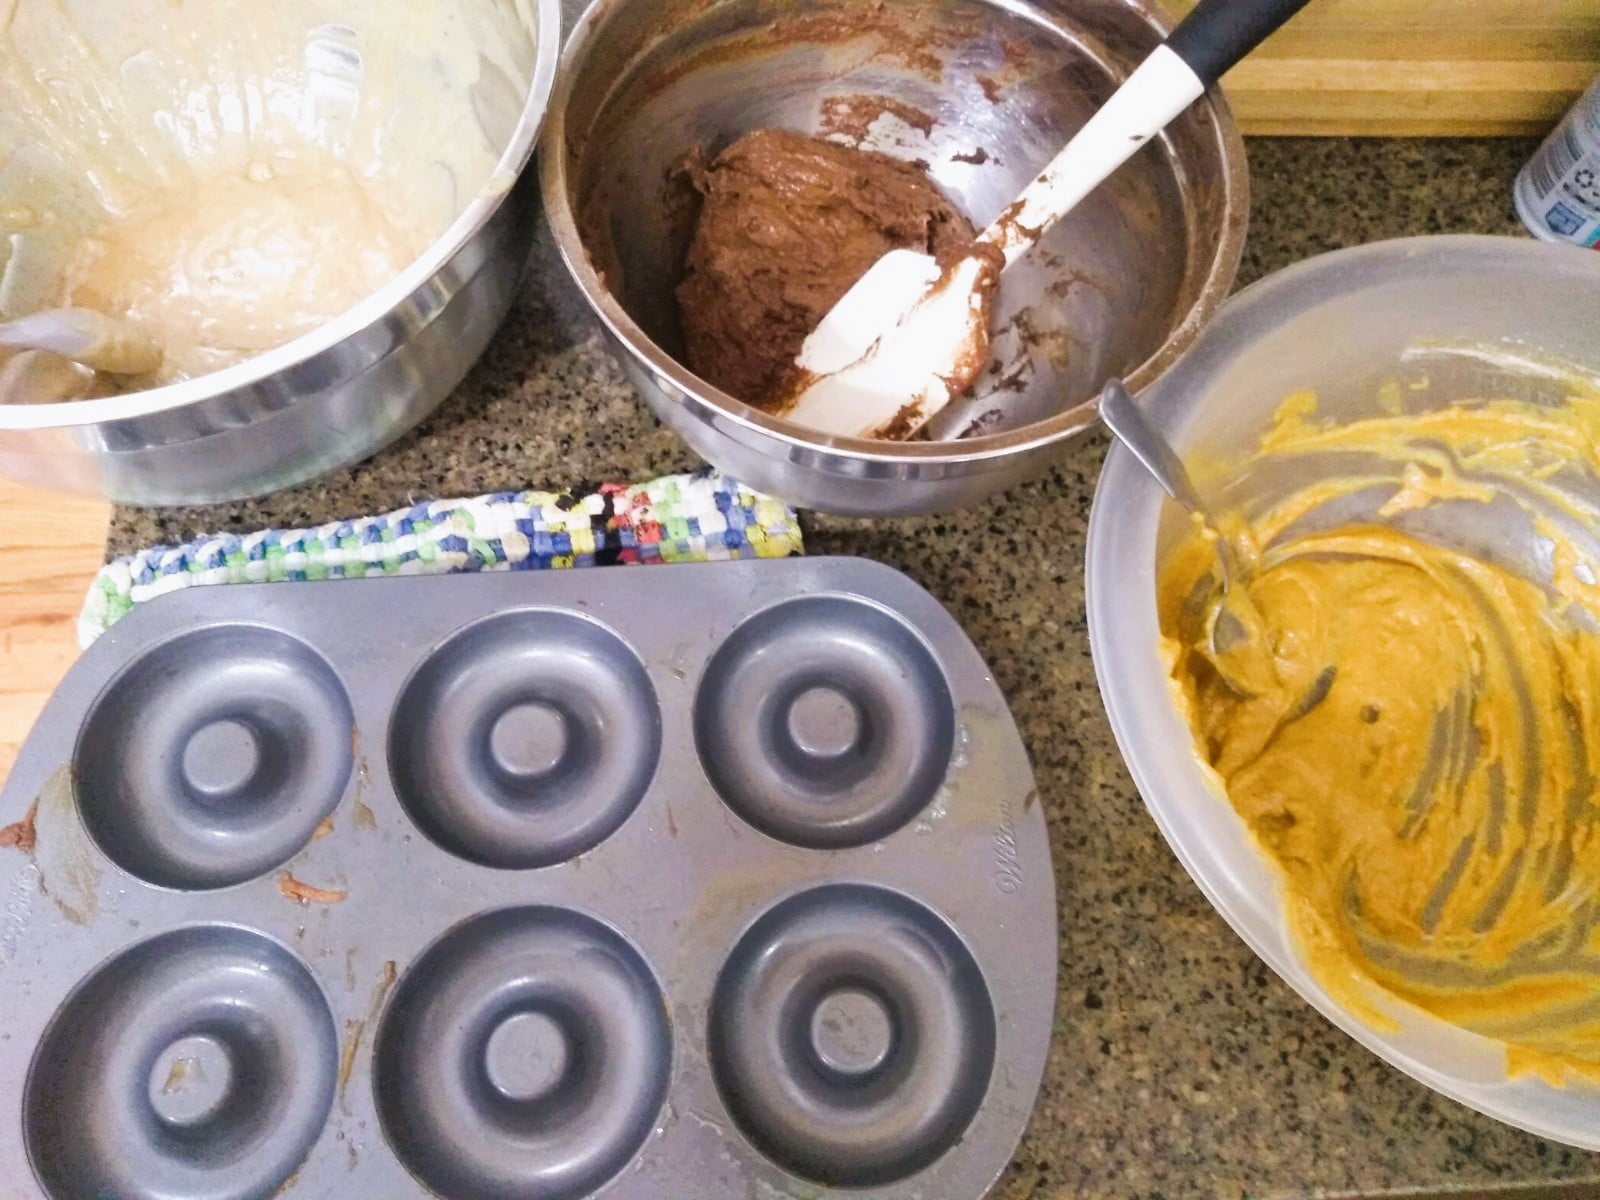 cider, pumpkin spice, and chocolate doughnut batter ready to go in the doughnut pan